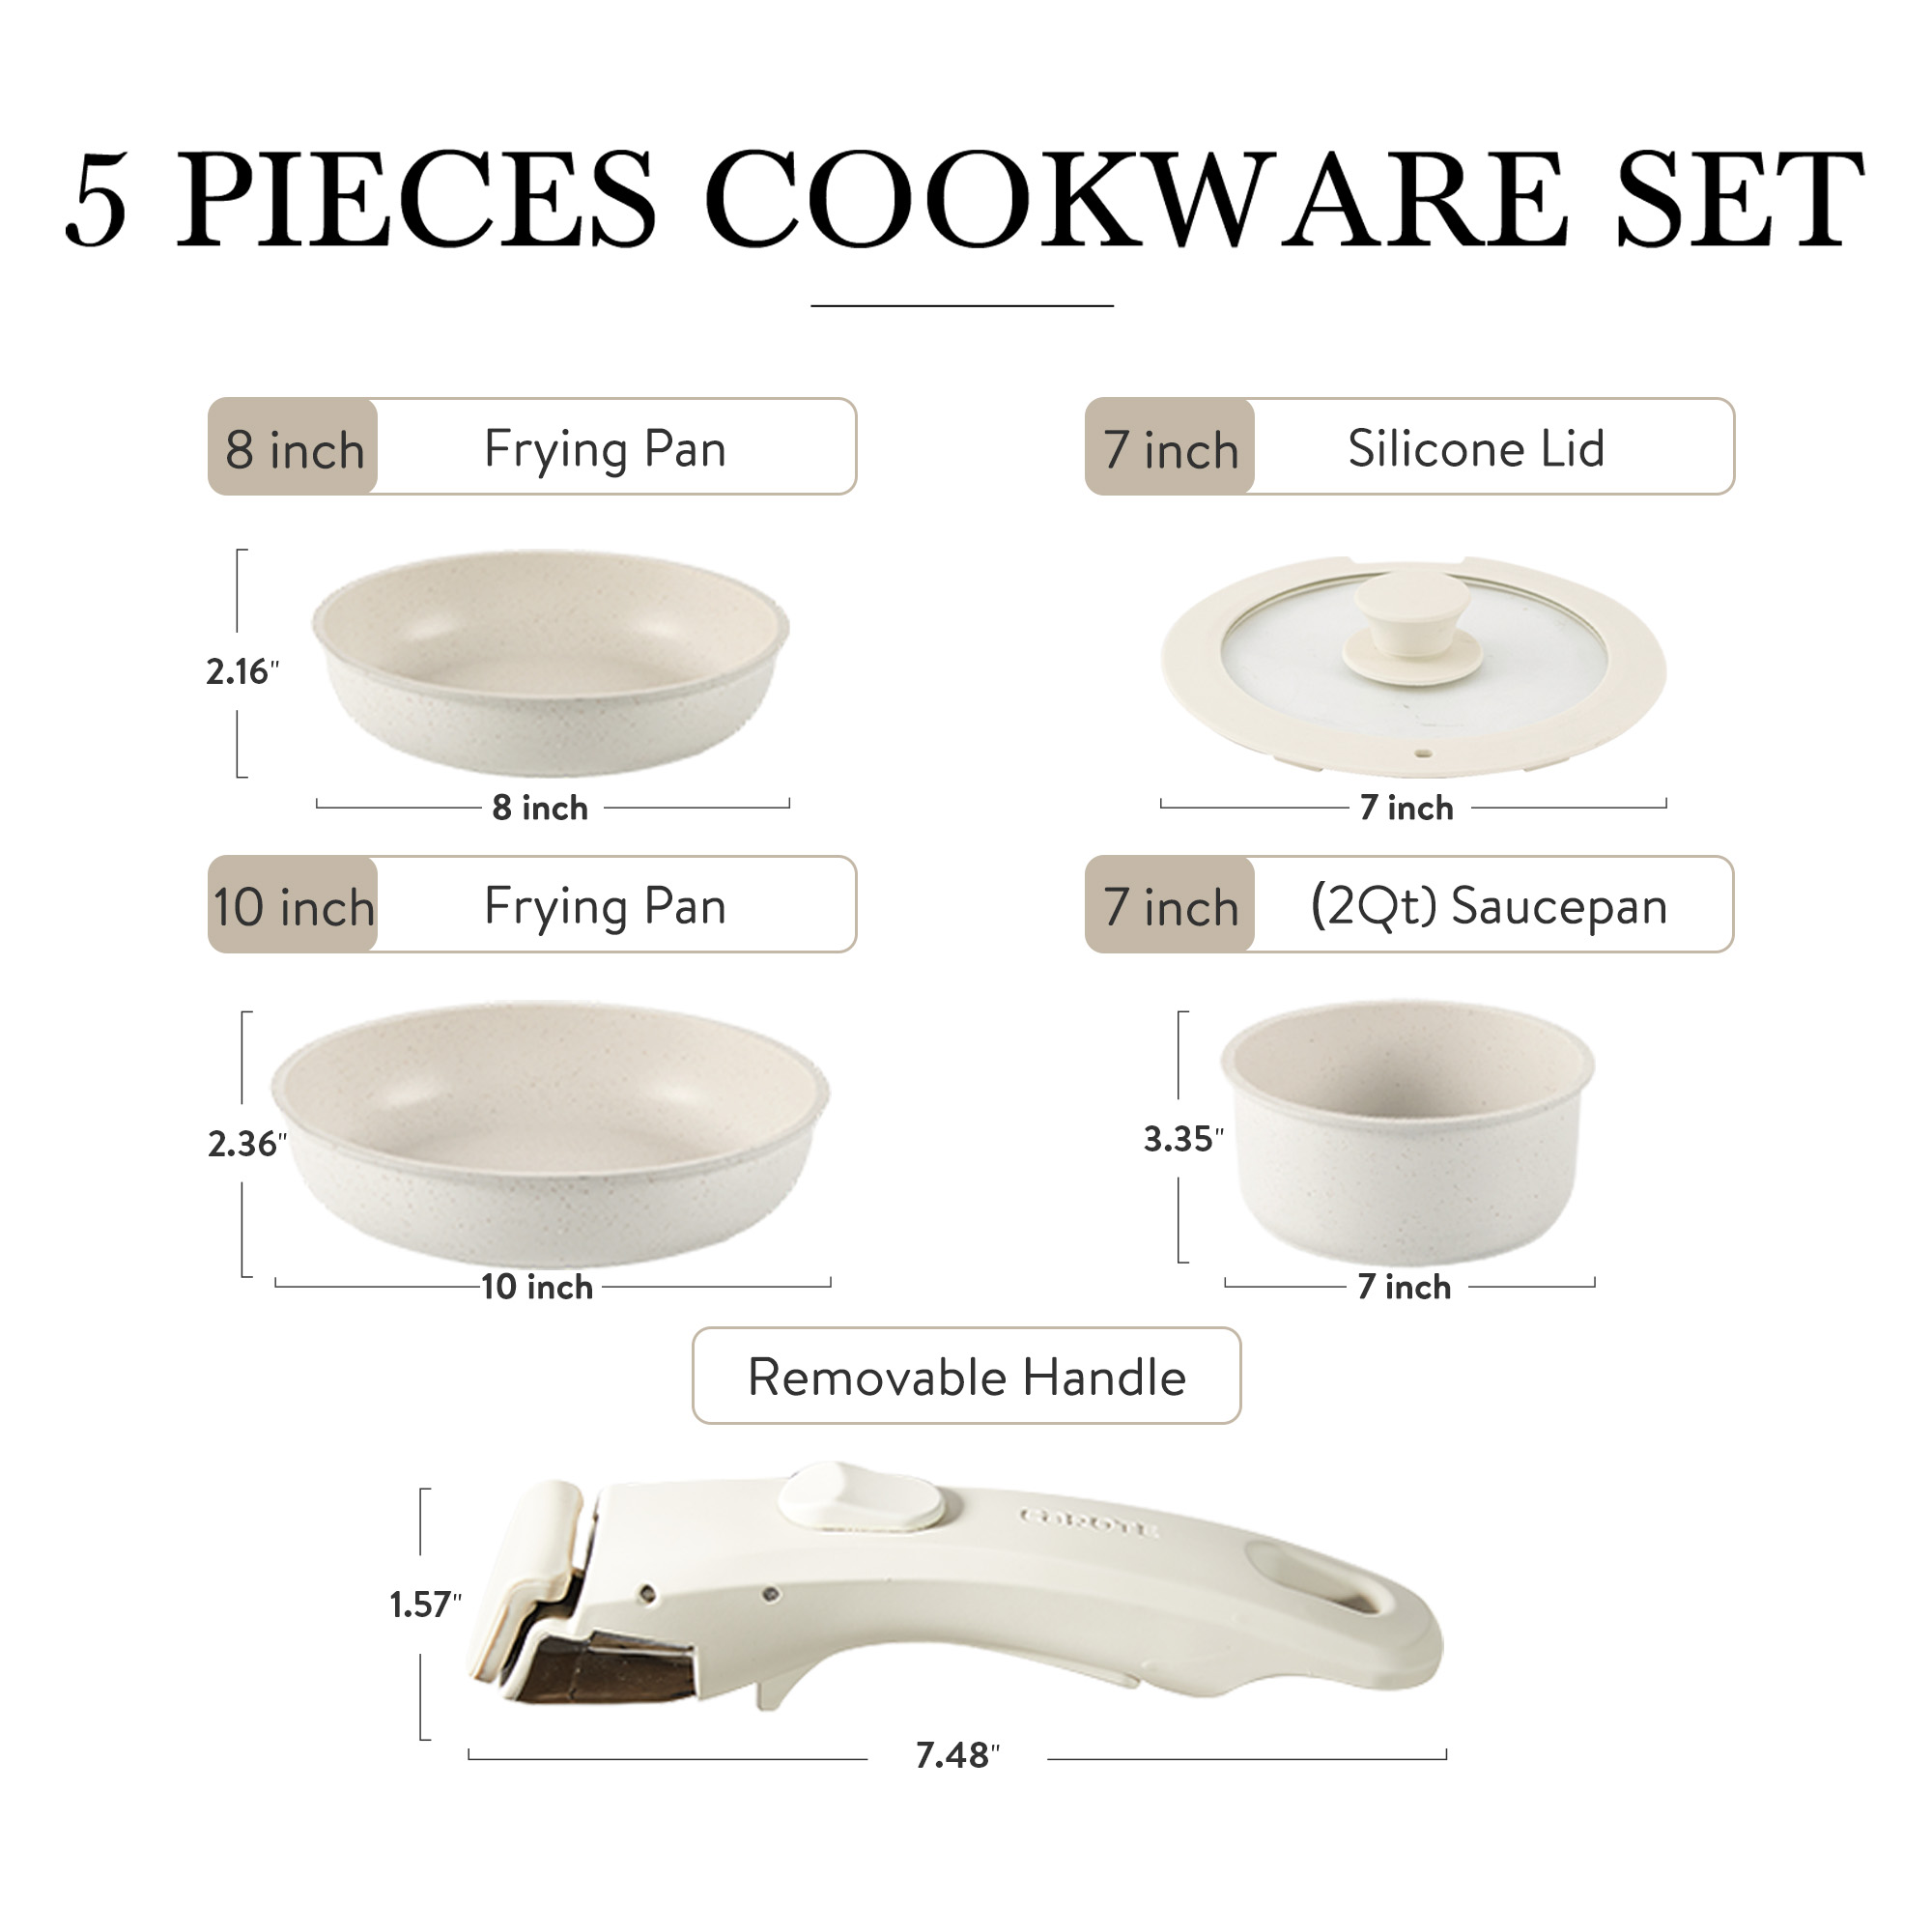 Carote Nonstick Cookware Sets with Detachable Handle, 5 Pcs Granite Non Stick Pots and Pans Set with Removable Handle Cookware - image 3 of 7